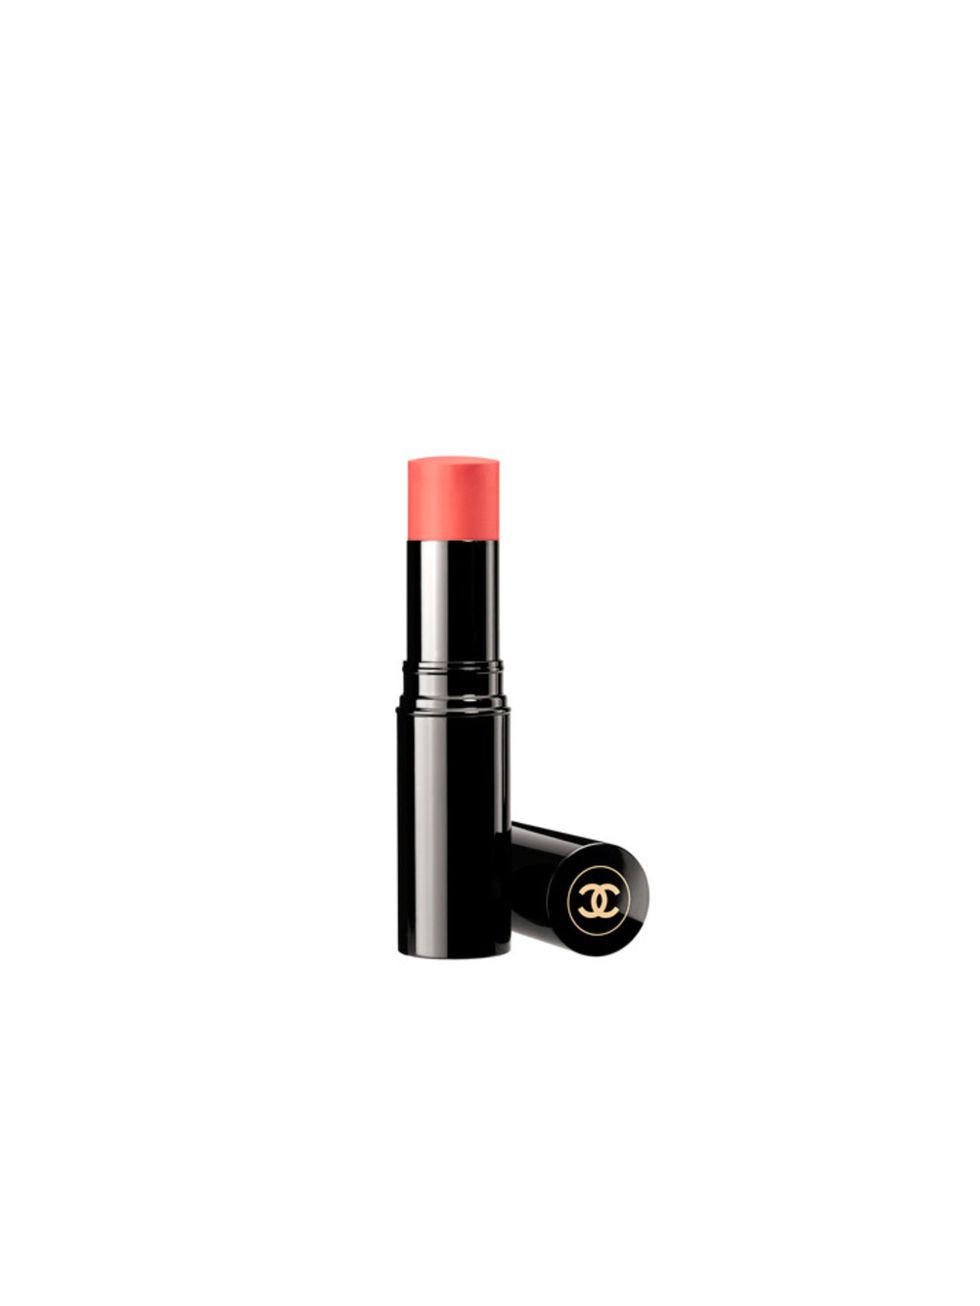 <p>Chanel's Les Beiges Healthy Glow Sheer Colour Stick in No 21, £32 is the perfect way to add a touch of natural looking colour. Smile to find the apples of your cheek (the puffy part) and dab your blush here. Blend in with your fingers, keeping your blu